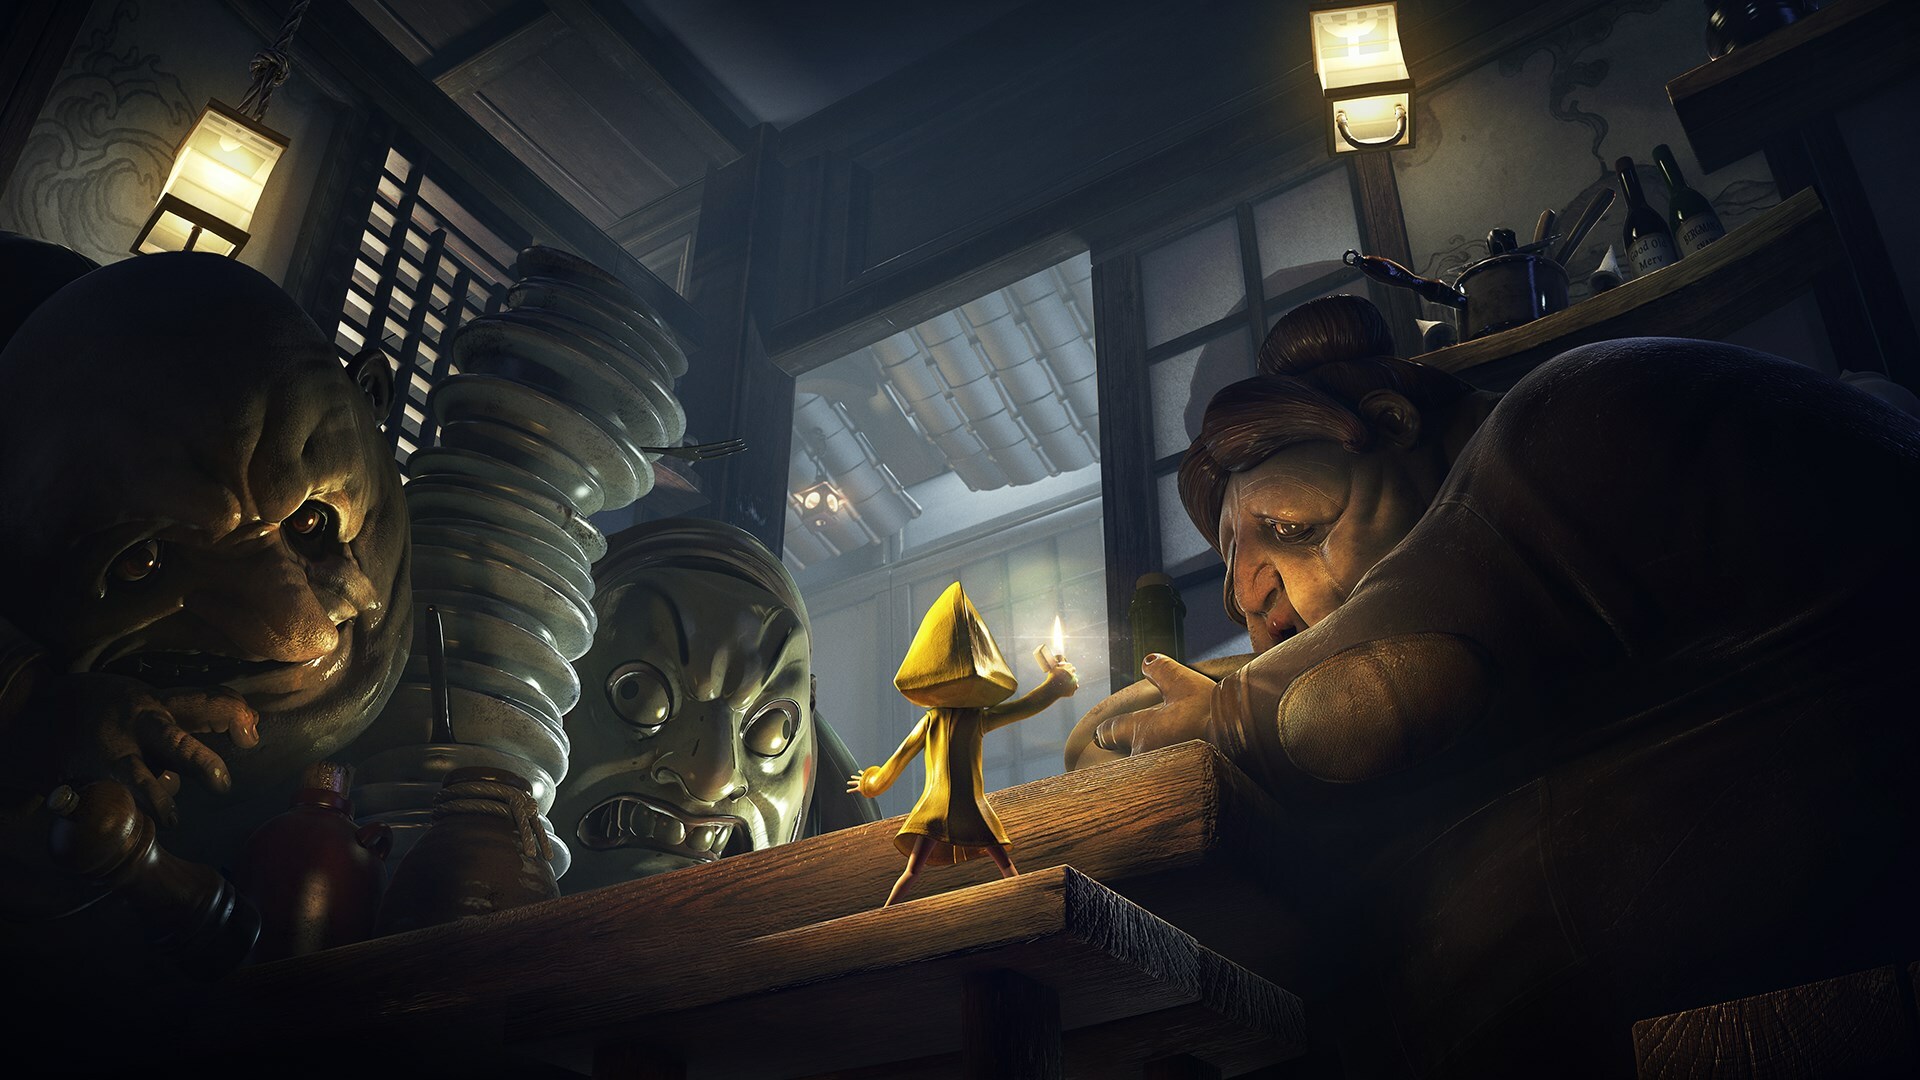 Little Nightmares 2: Enhanced Edition out today on consoles, PC